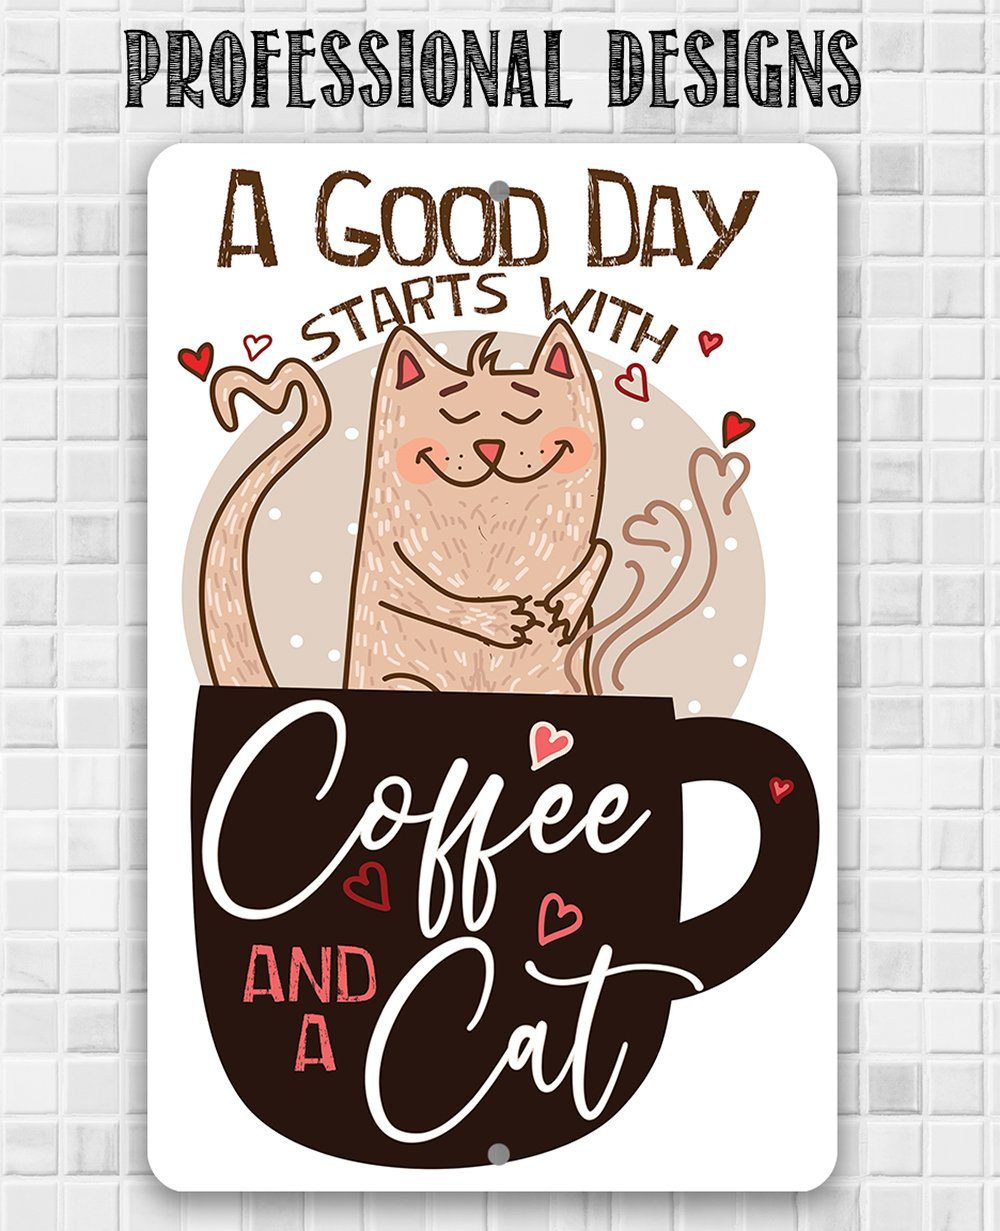 A Good Day Starts With - Metal Sign | Lone Star Art.